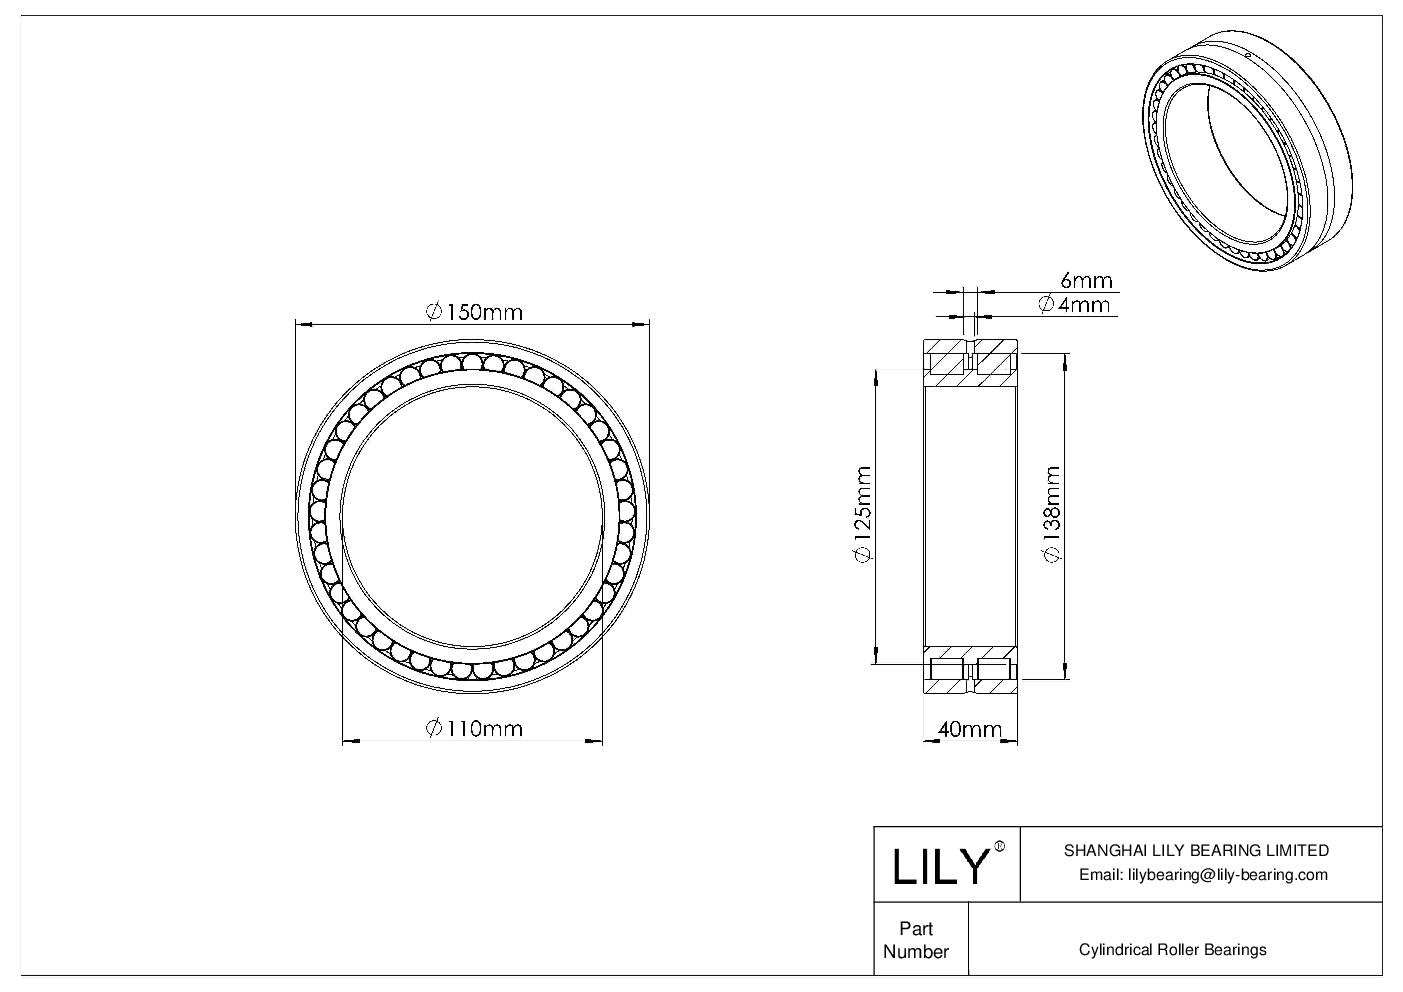 NNCL 4922 CV Double Row Full Complement Cylindrical Roller Bearings cad drawing